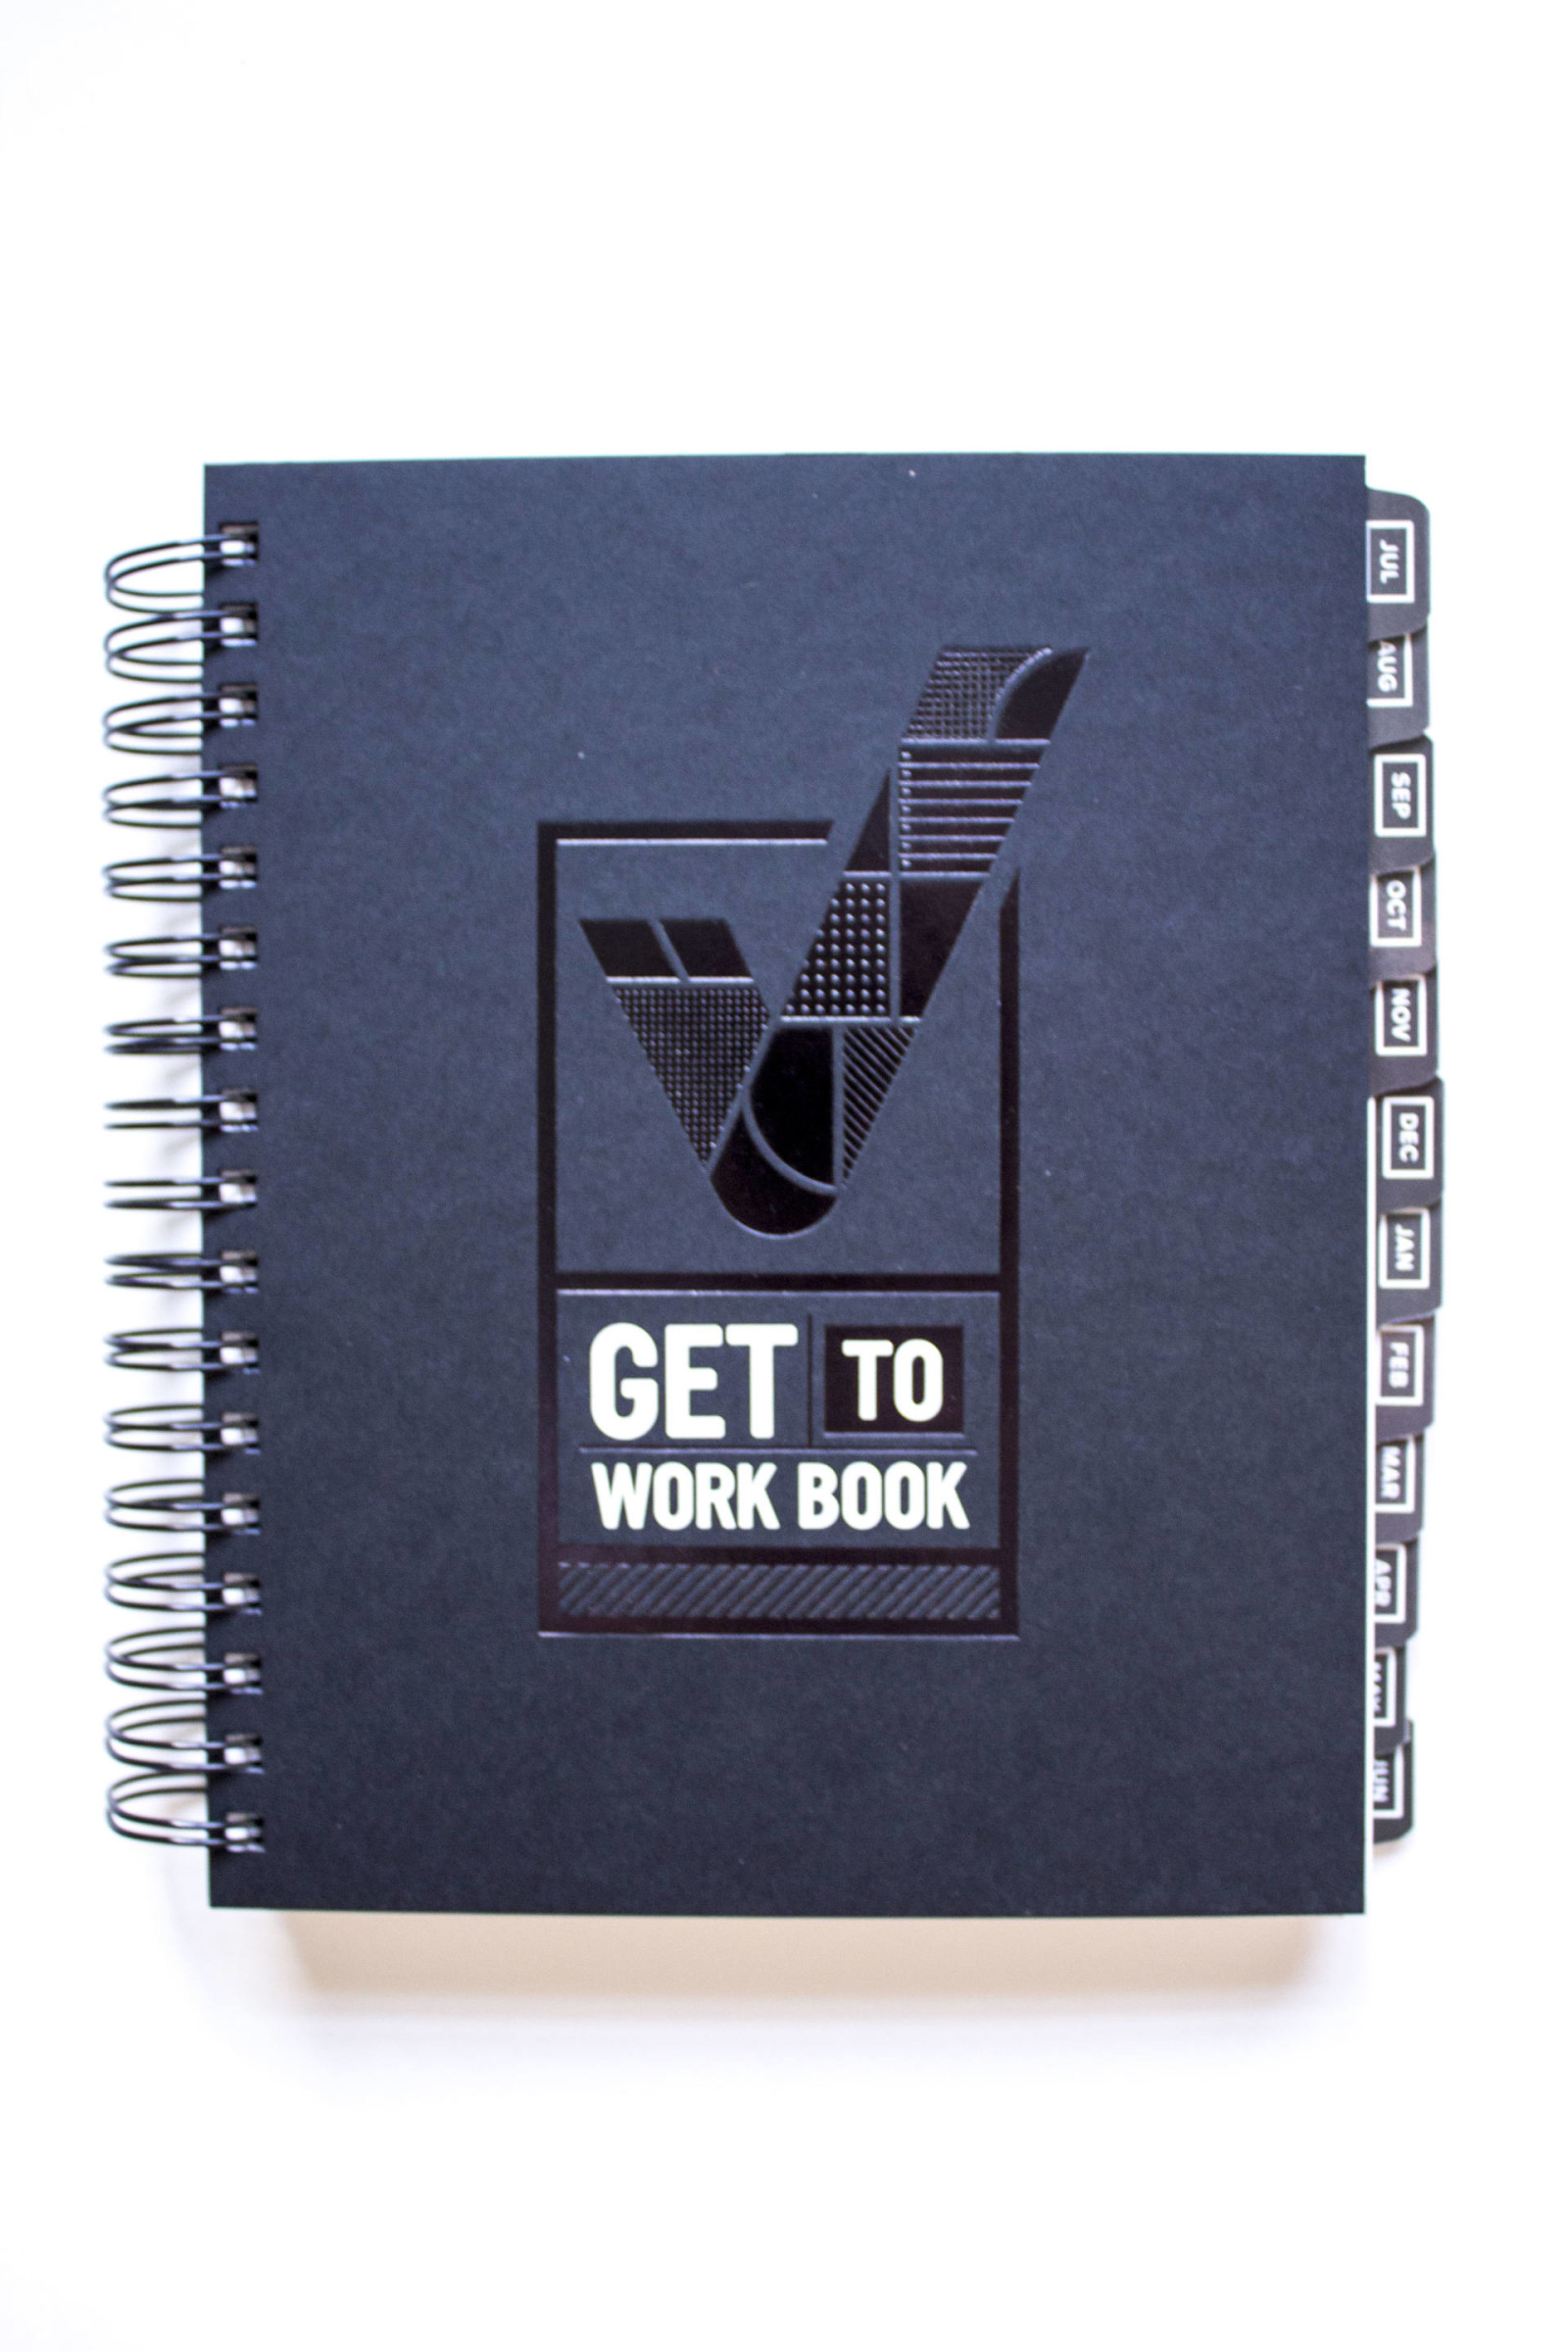 get to work book cover